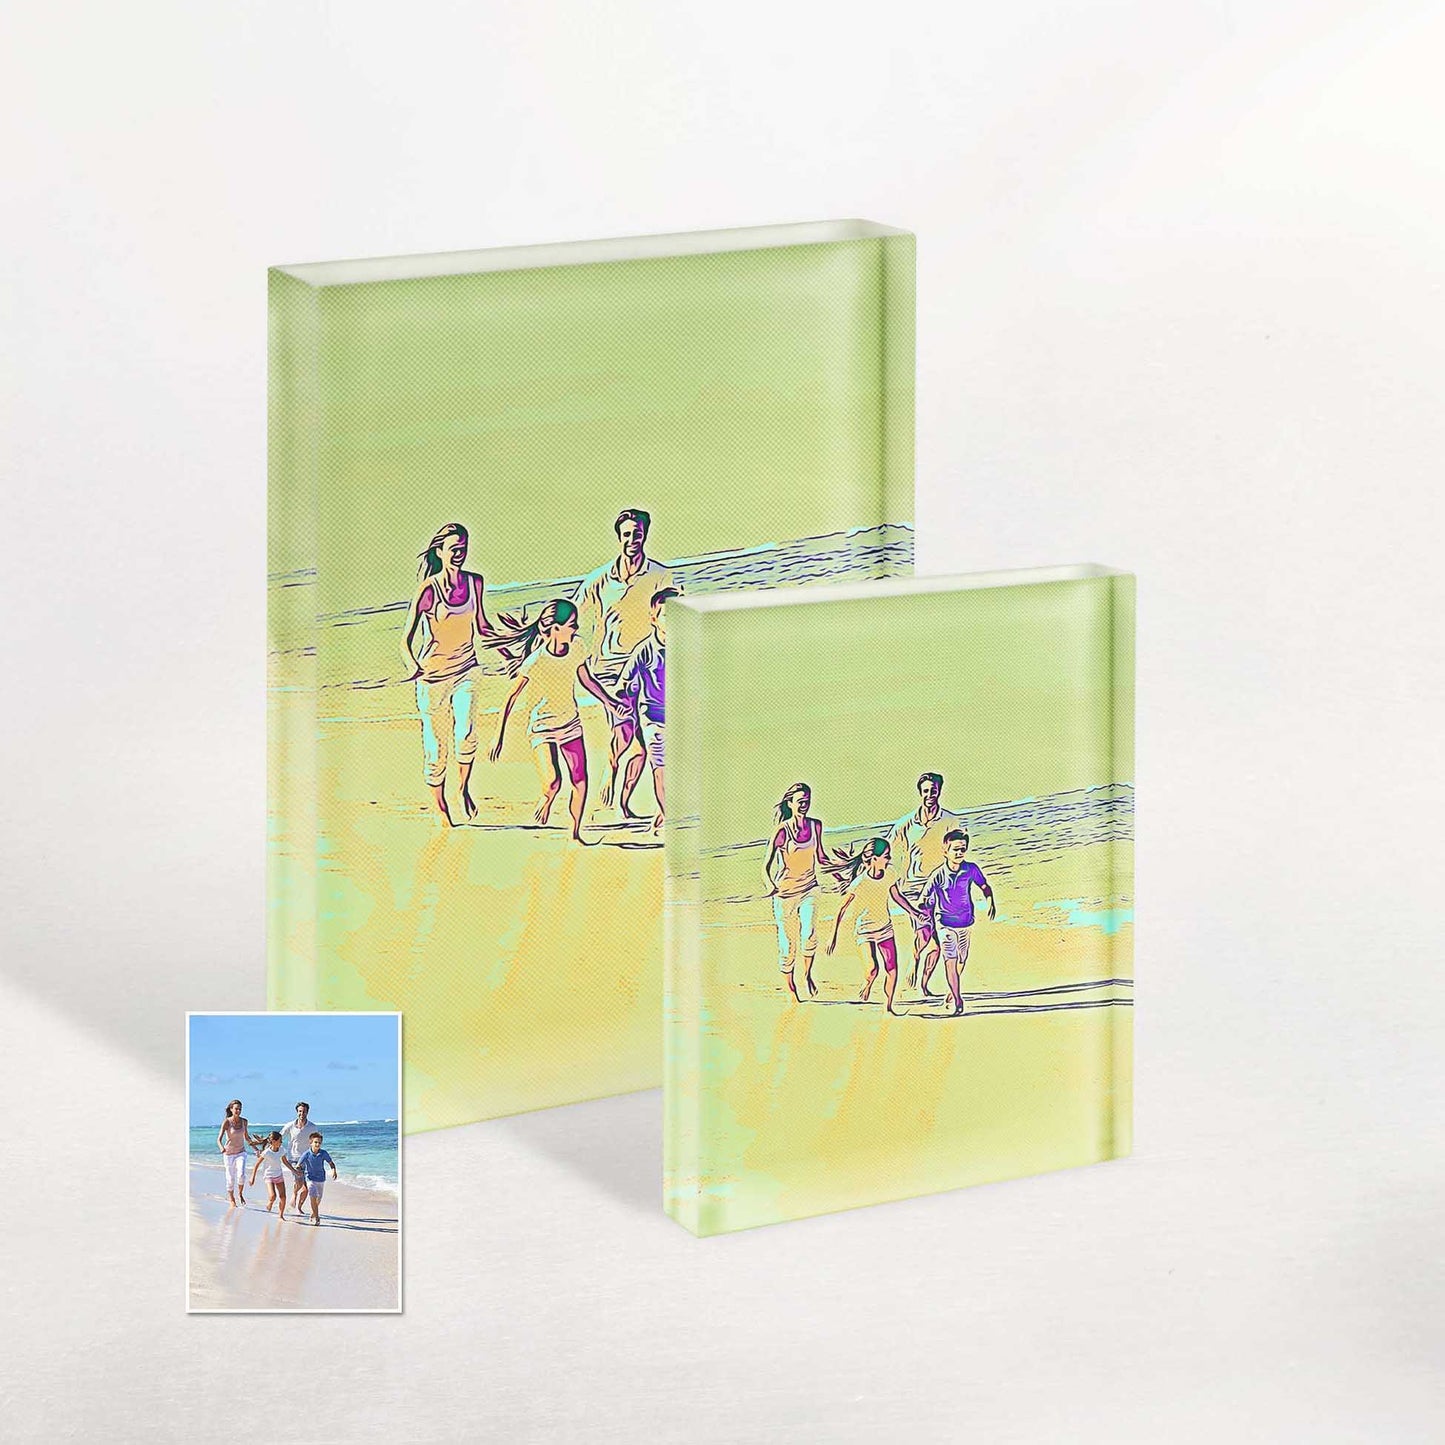 Inspire delightful memories with our Personalised Blue and Yellow Cartoon Acrylic Block Photo. This fun and exciting gift idea for family and friends' anniversaries adds a playful touch to their celebrations, reminding them of the love and happiness they share.